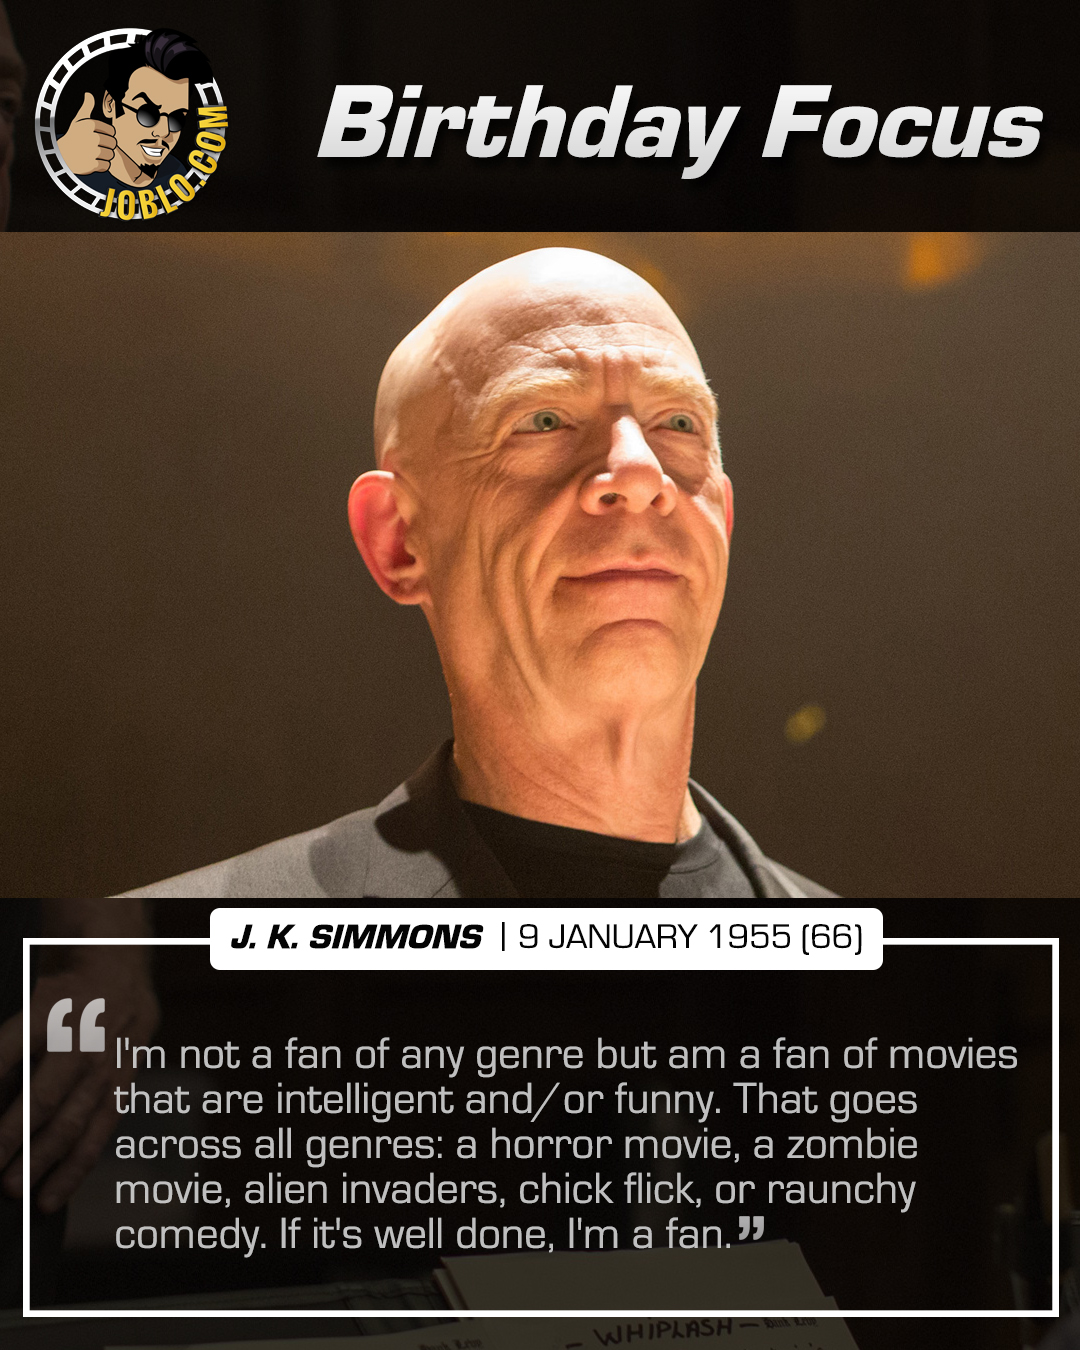 Wishing a very happy 66th birthday to J.K. Simmons!

What do you think is his best performance? 